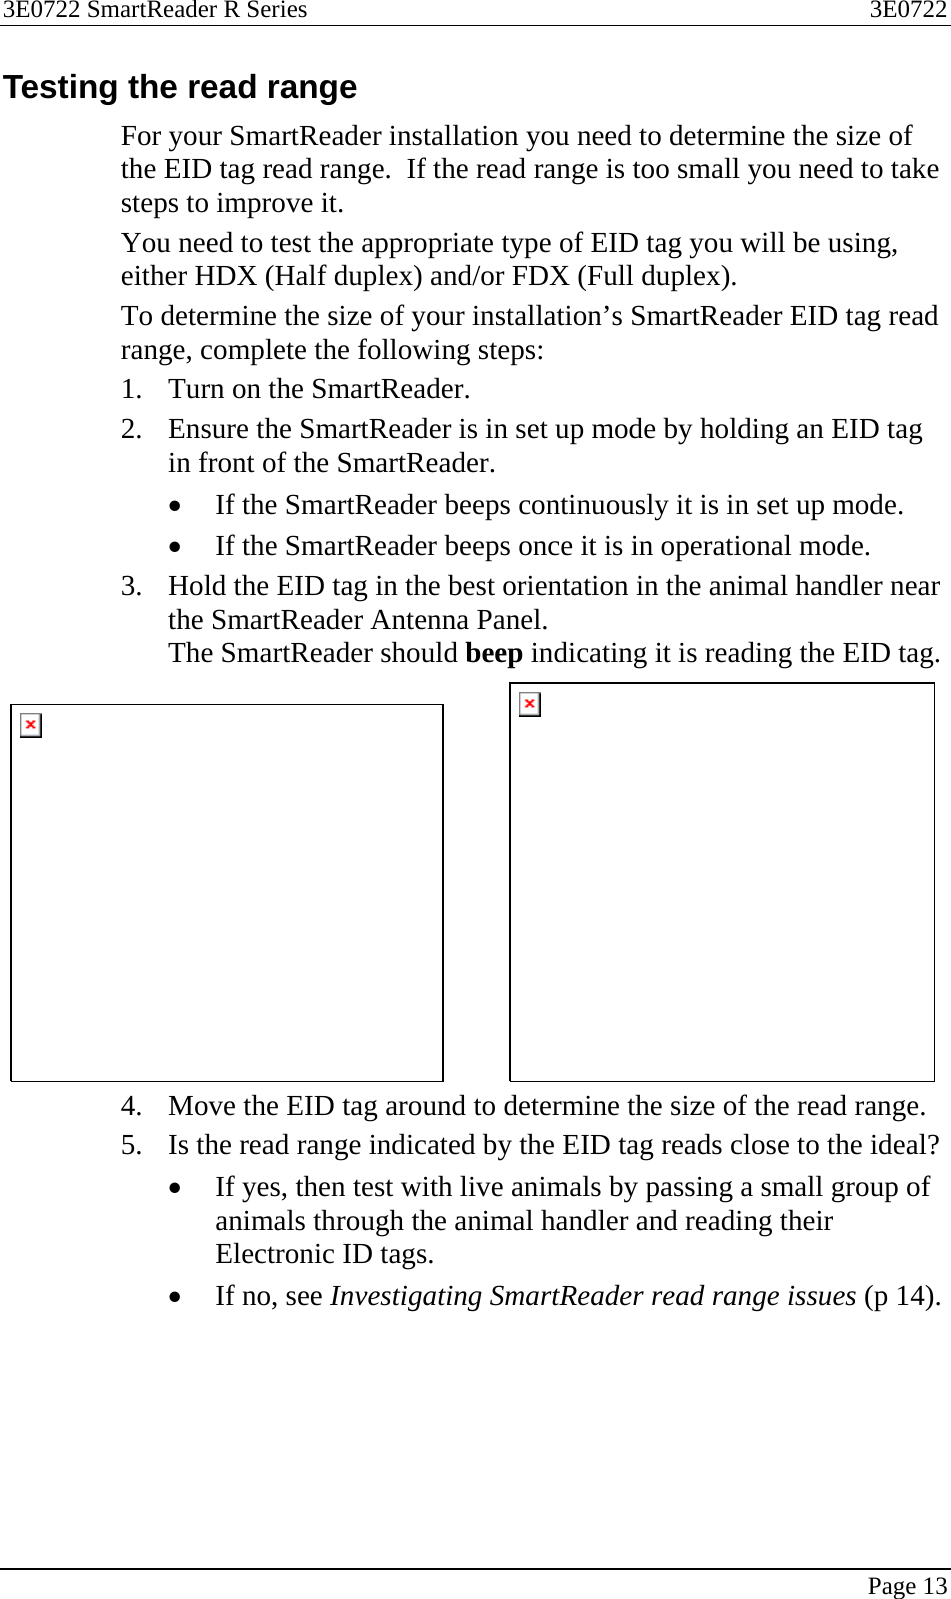 3E0722 SmartReader R Series  3E0722   Page 13  Testing the read range For your SmartReader installation you need to determine the size of the EID tag read range.  If the read range is too small you need to take steps to improve it.   You need to test the appropriate type of EID tag you will be using, either HDX (Half duplex) and/or FDX (Full duplex). To determine the size of your installation’s SmartReader EID tag read range, complete the following steps: 1. Turn on the SmartReader. 2. Ensure the SmartReader is in set up mode by holding an EID tag in front of the SmartReader.   • If the SmartReader beeps continuously it is in set up mode. • If the SmartReader beeps once it is in operational mode. 3. Hold the EID tag in the best orientation in the animal handler near the SmartReader Antenna Panel. The SmartReader should beep indicating it is reading the EID tag.             4. Move the EID tag around to determine the size of the read range. 5. Is the read range indicated by the EID tag reads close to the ideal? • If yes, then test with live animals by passing a small group of animals through the animal handler and reading their Electronic ID tags. • If no, see Investigating SmartReader read range issues (p 14).  